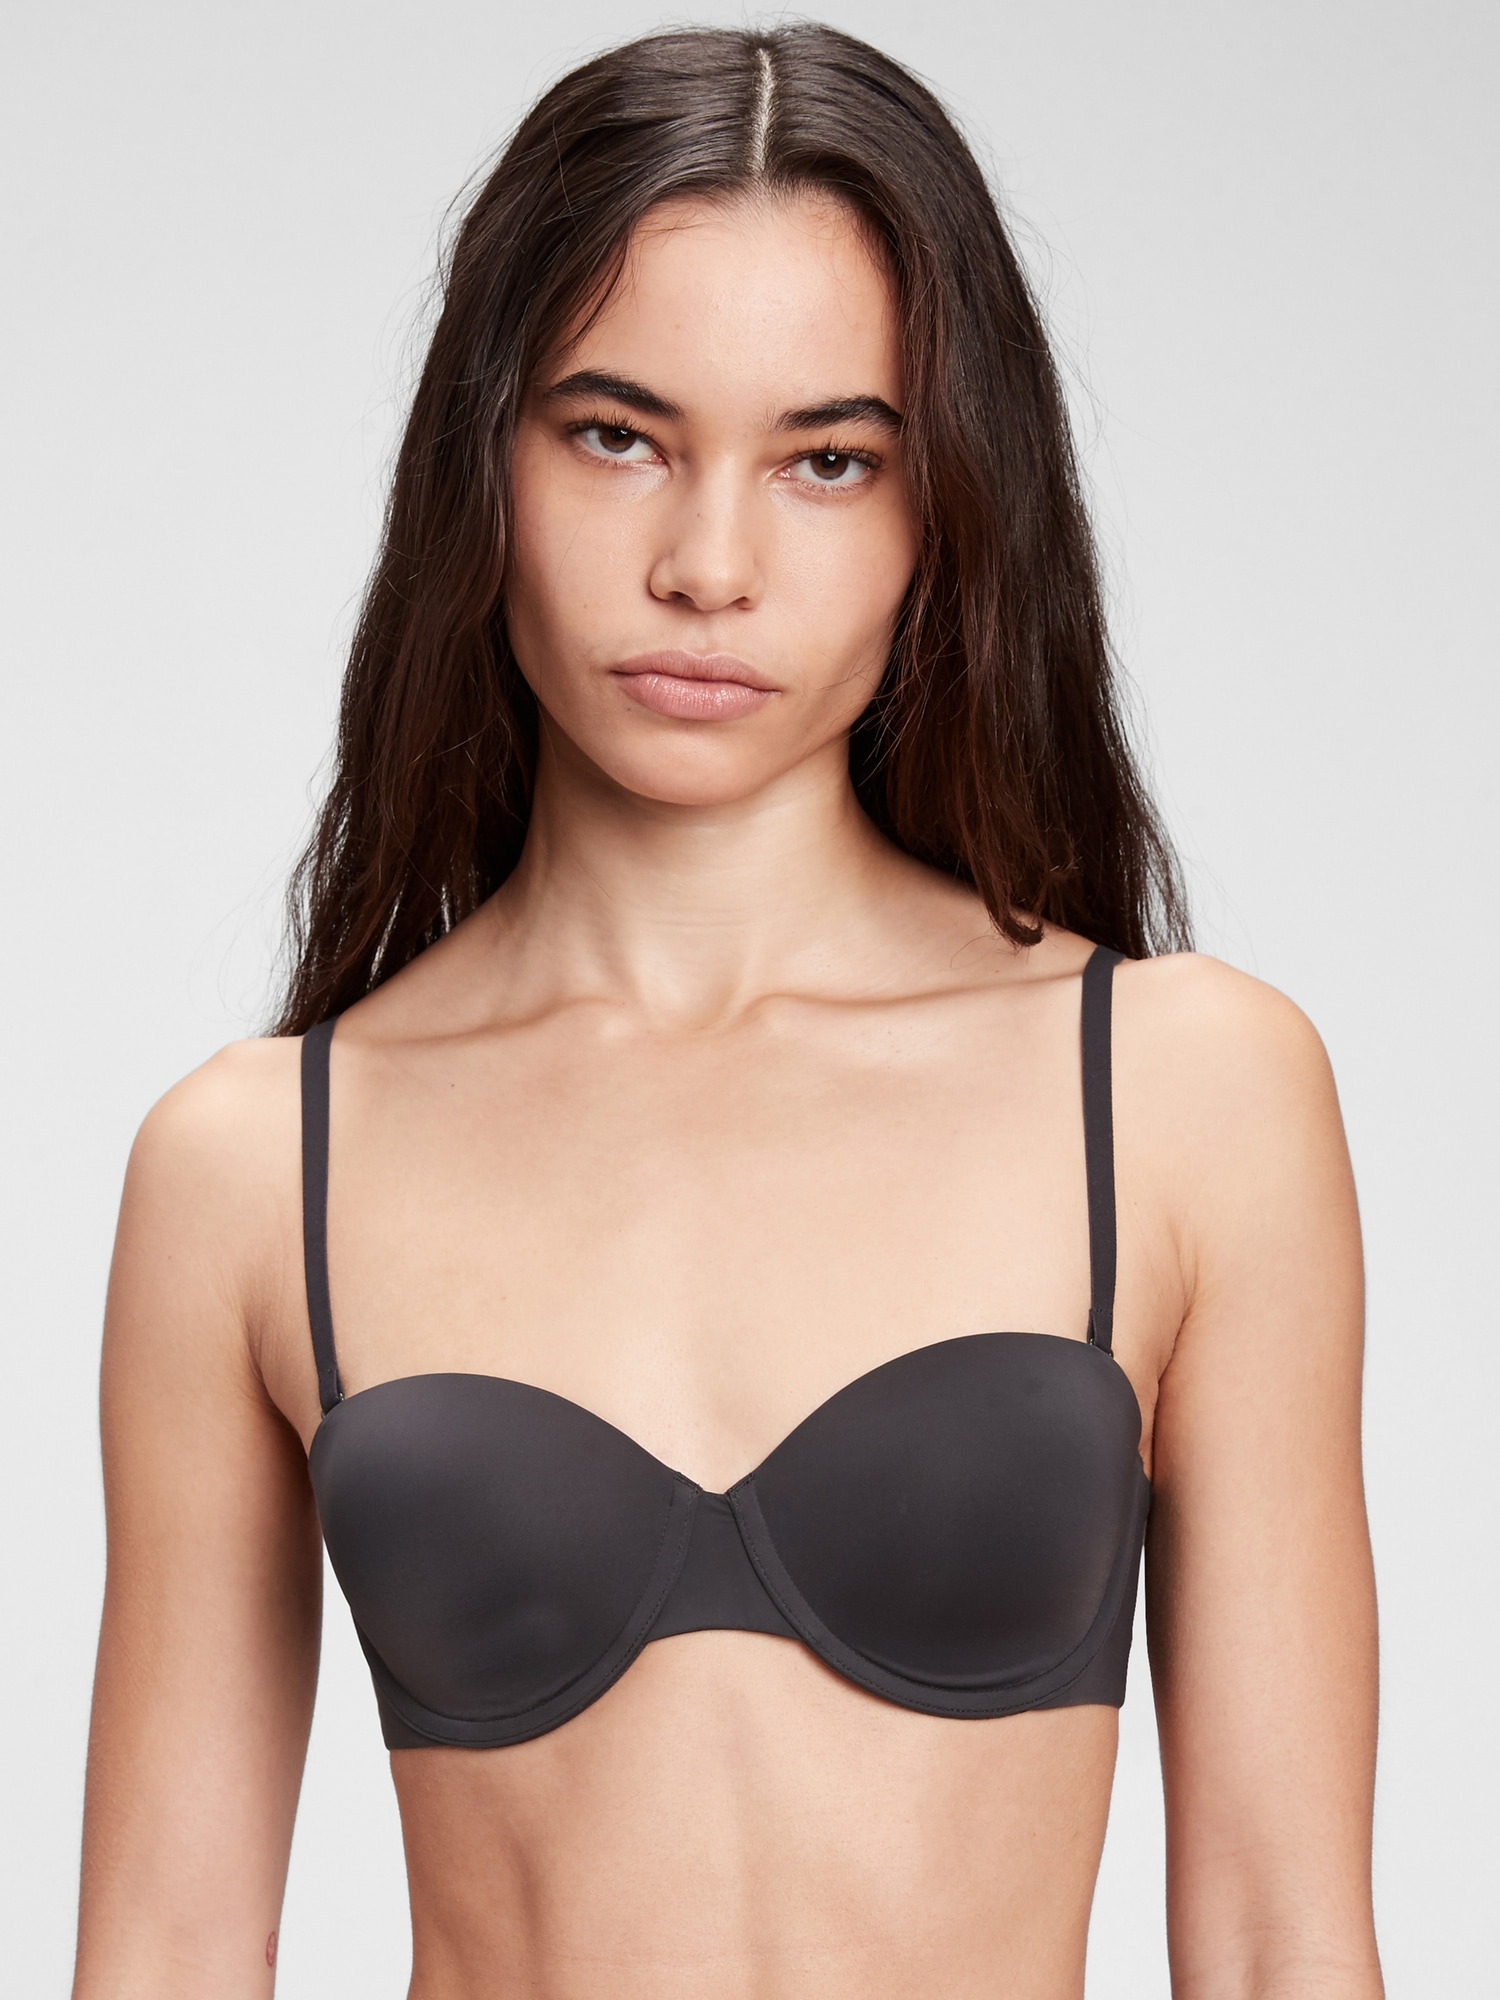 H&m new 2-pack strapless bras Sizes 34D & 38C With silicone edge to hang it  Swipe >>>